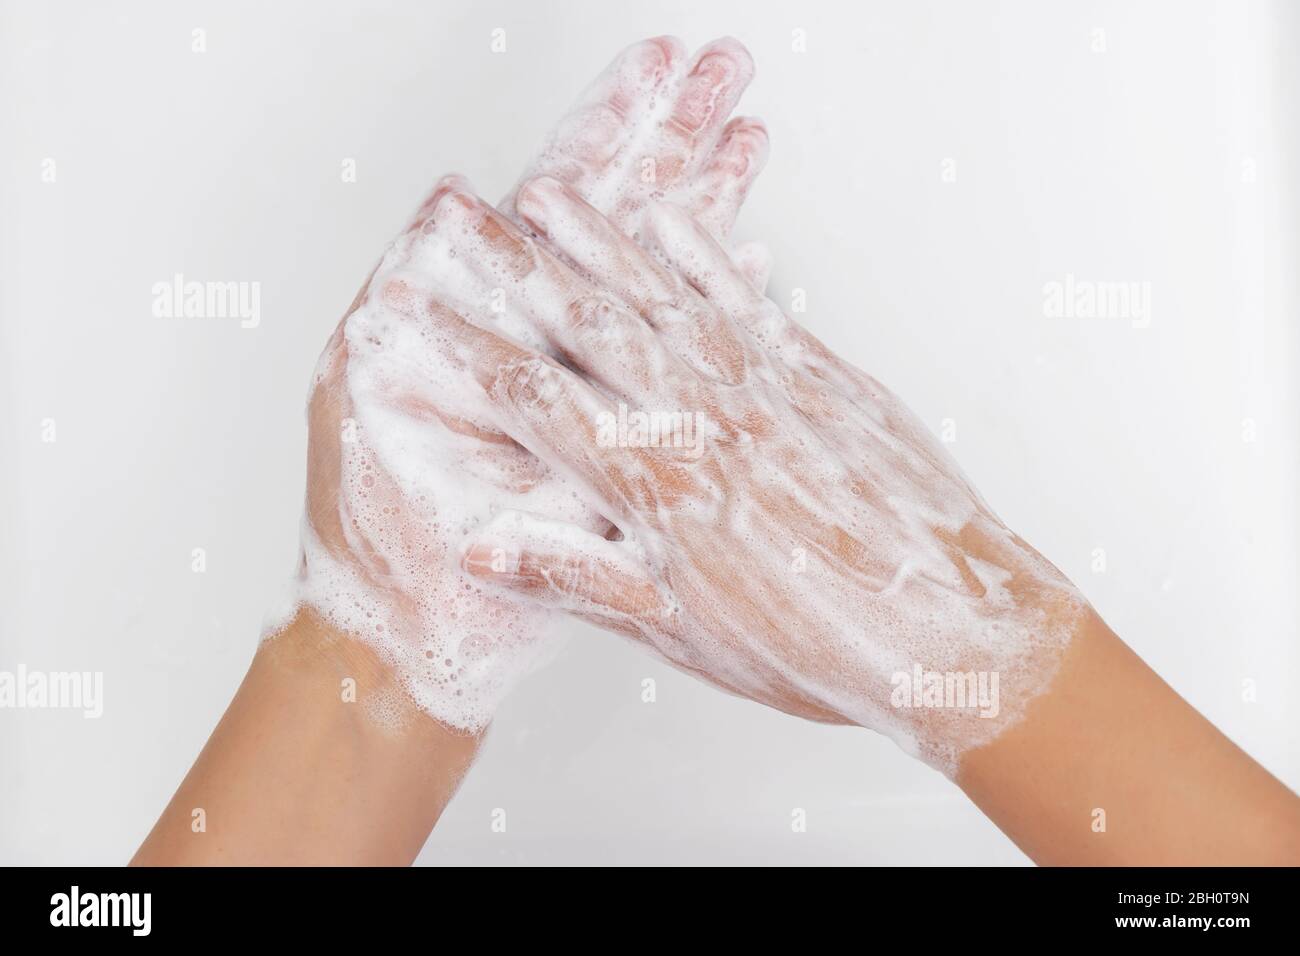 personal hygiene. washing hands, rubbing hand thoroughly with soap that has a lot of bubbles for cleaning and disinfection, prevention of spreading of Stock Photo